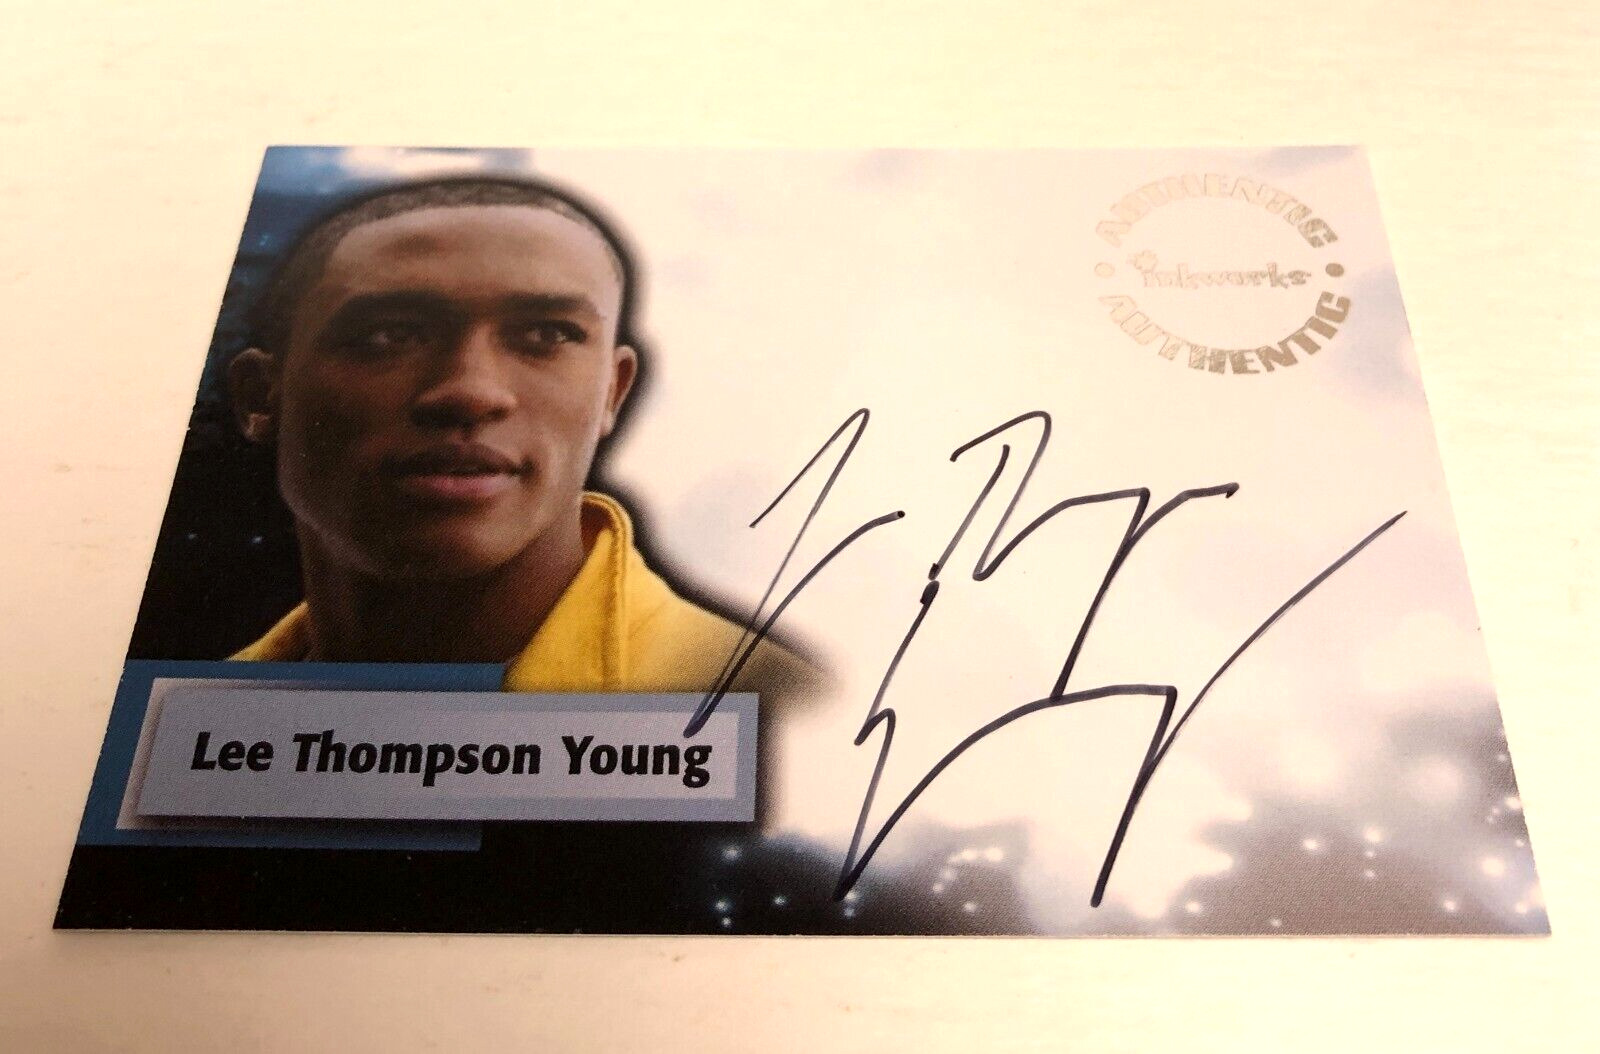 2006 Autographed Smallville Trading Card Signed by Lee Thompson Young A38